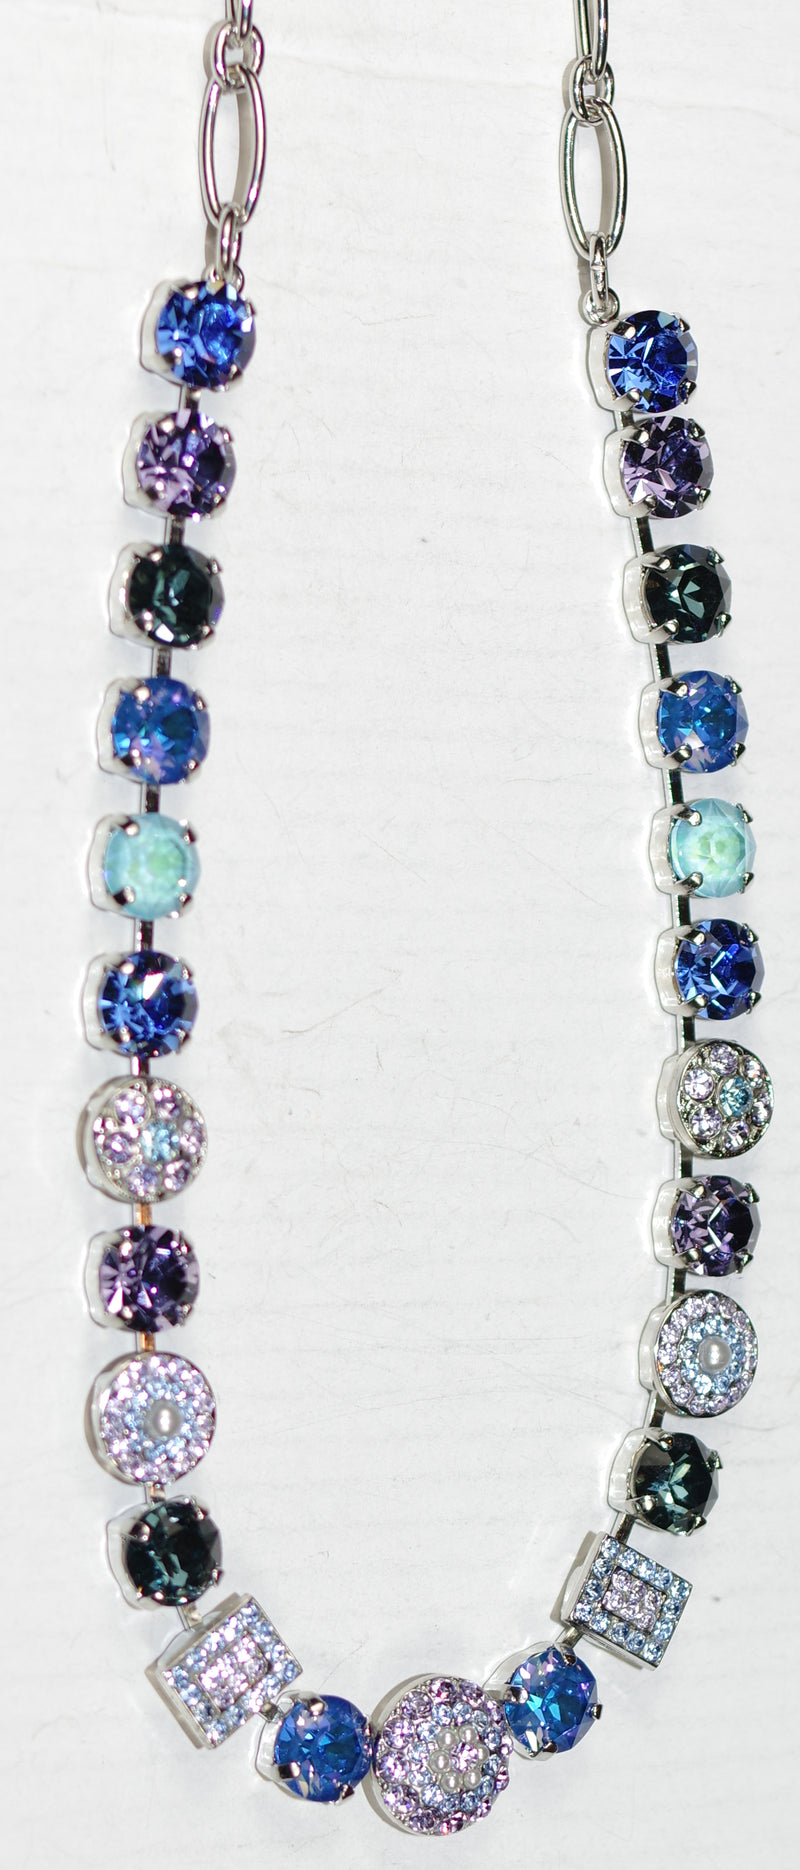 MARIANA NECKLACE ELECTRIC BLUE: blue, lavender, pearl, pink stones in silver rhodium setting, 18" adjustable chain